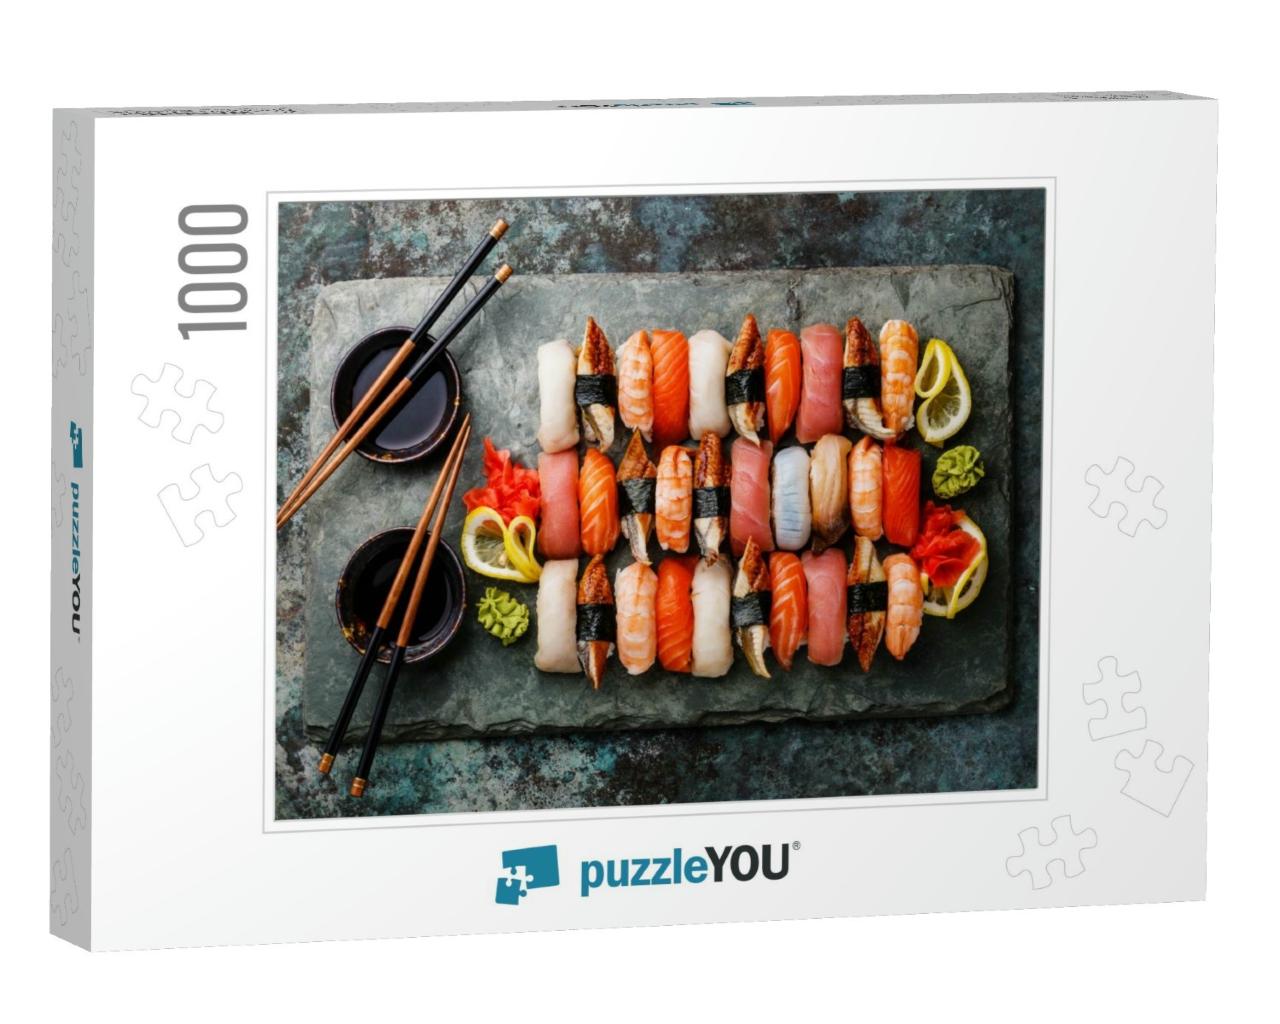 Nigiri Sushi Set on Gray Stone Slate on Metal Background... Jigsaw Puzzle with 1000 pieces